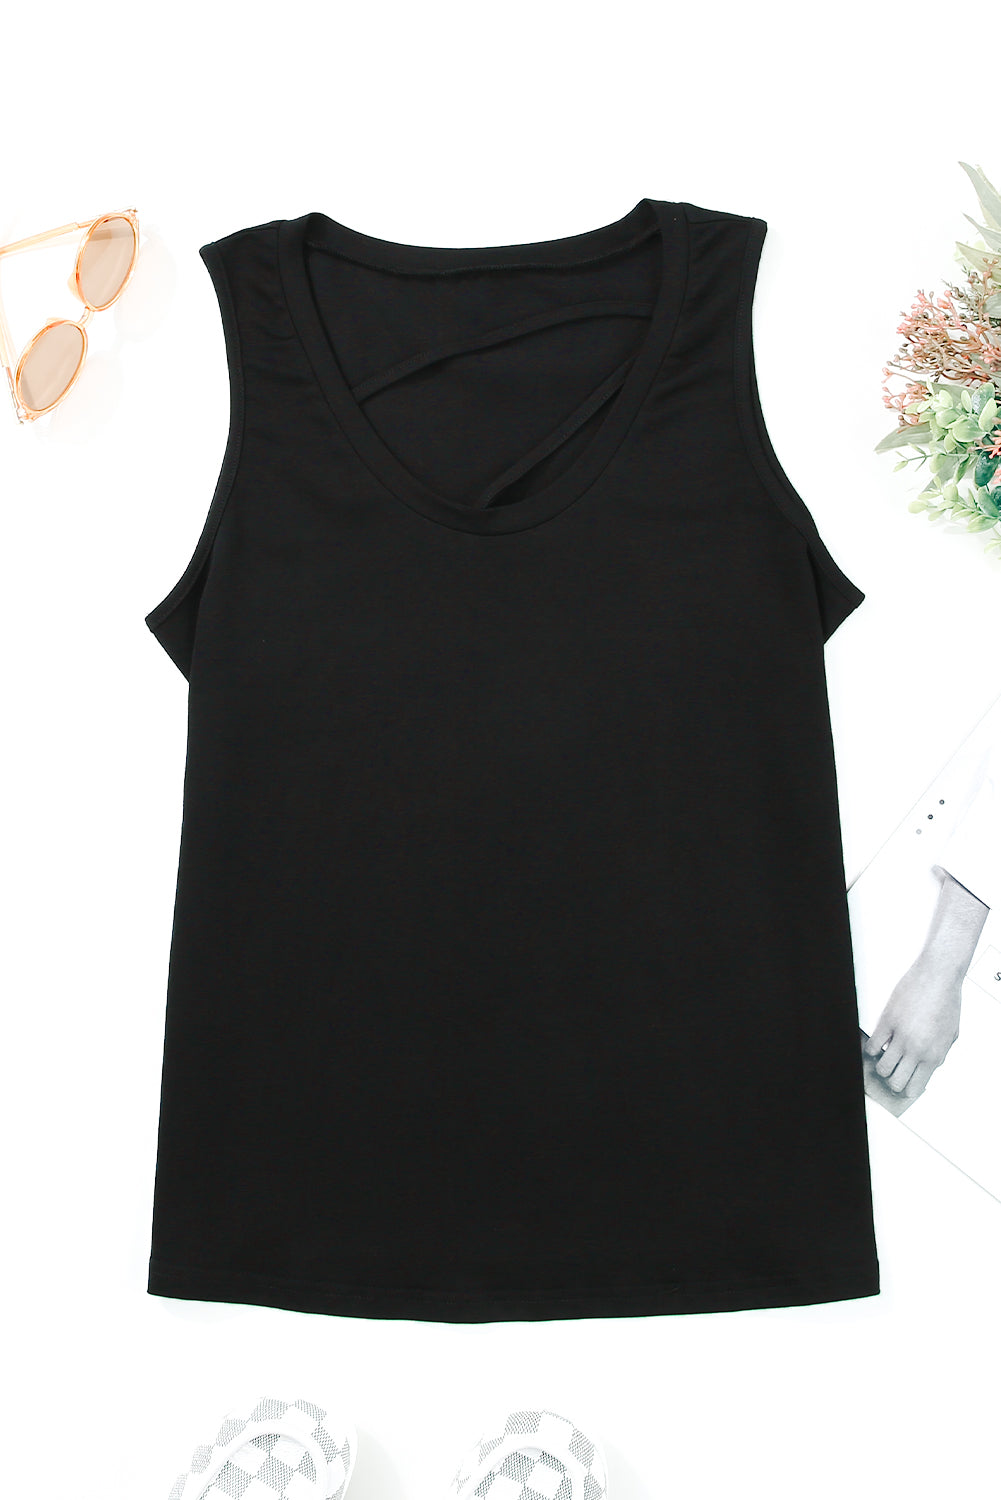 Black Strappy Hollow-out Neck Tank Top Tank Tops JT's Designer Fashion